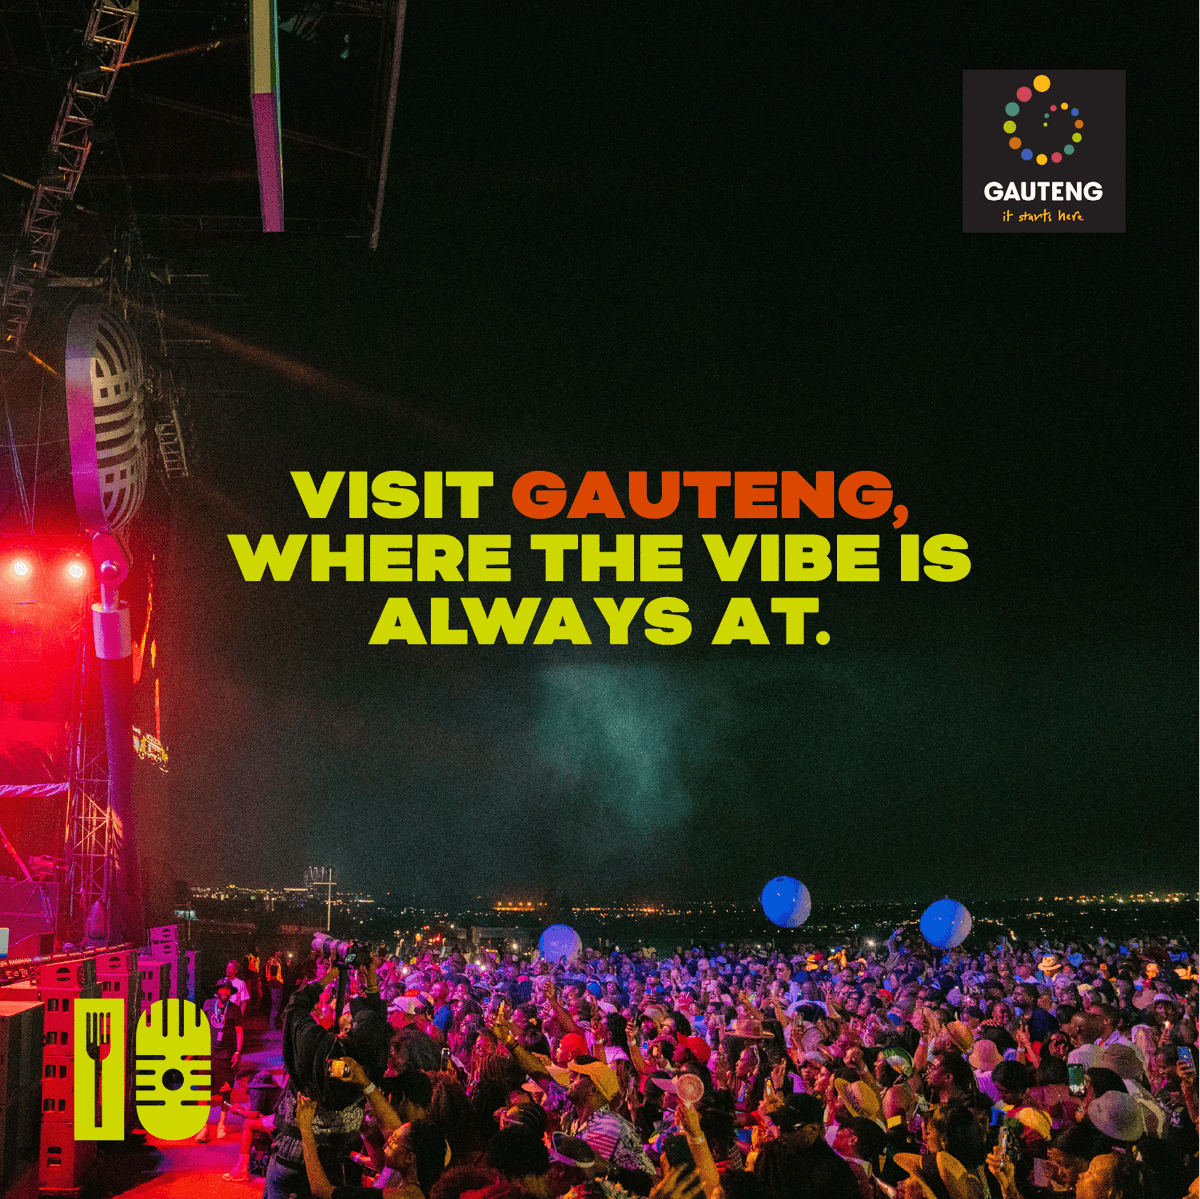 The city of gold glittered like it always does this year as we celebrated 10yrs of our festival. Year after year we gather in our playground, Gauteng, Mzansi's melting of culture, where the Vibe is at #GPLifestyle. #DStvDeliciousFestival #VisitGauteng #Welcome2joburg